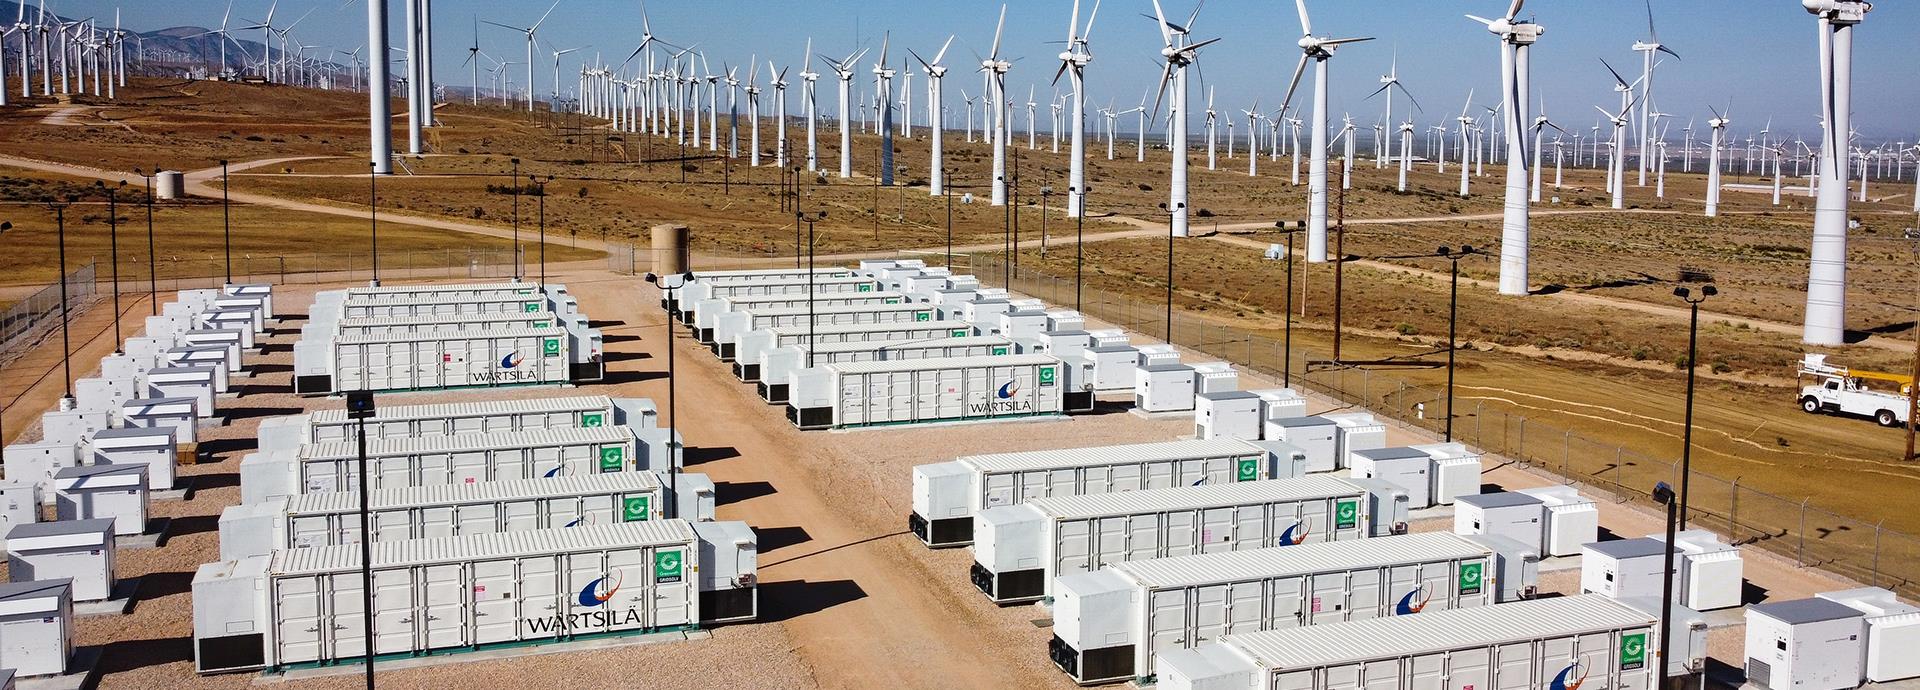 Integrating Energy Storage Solutions